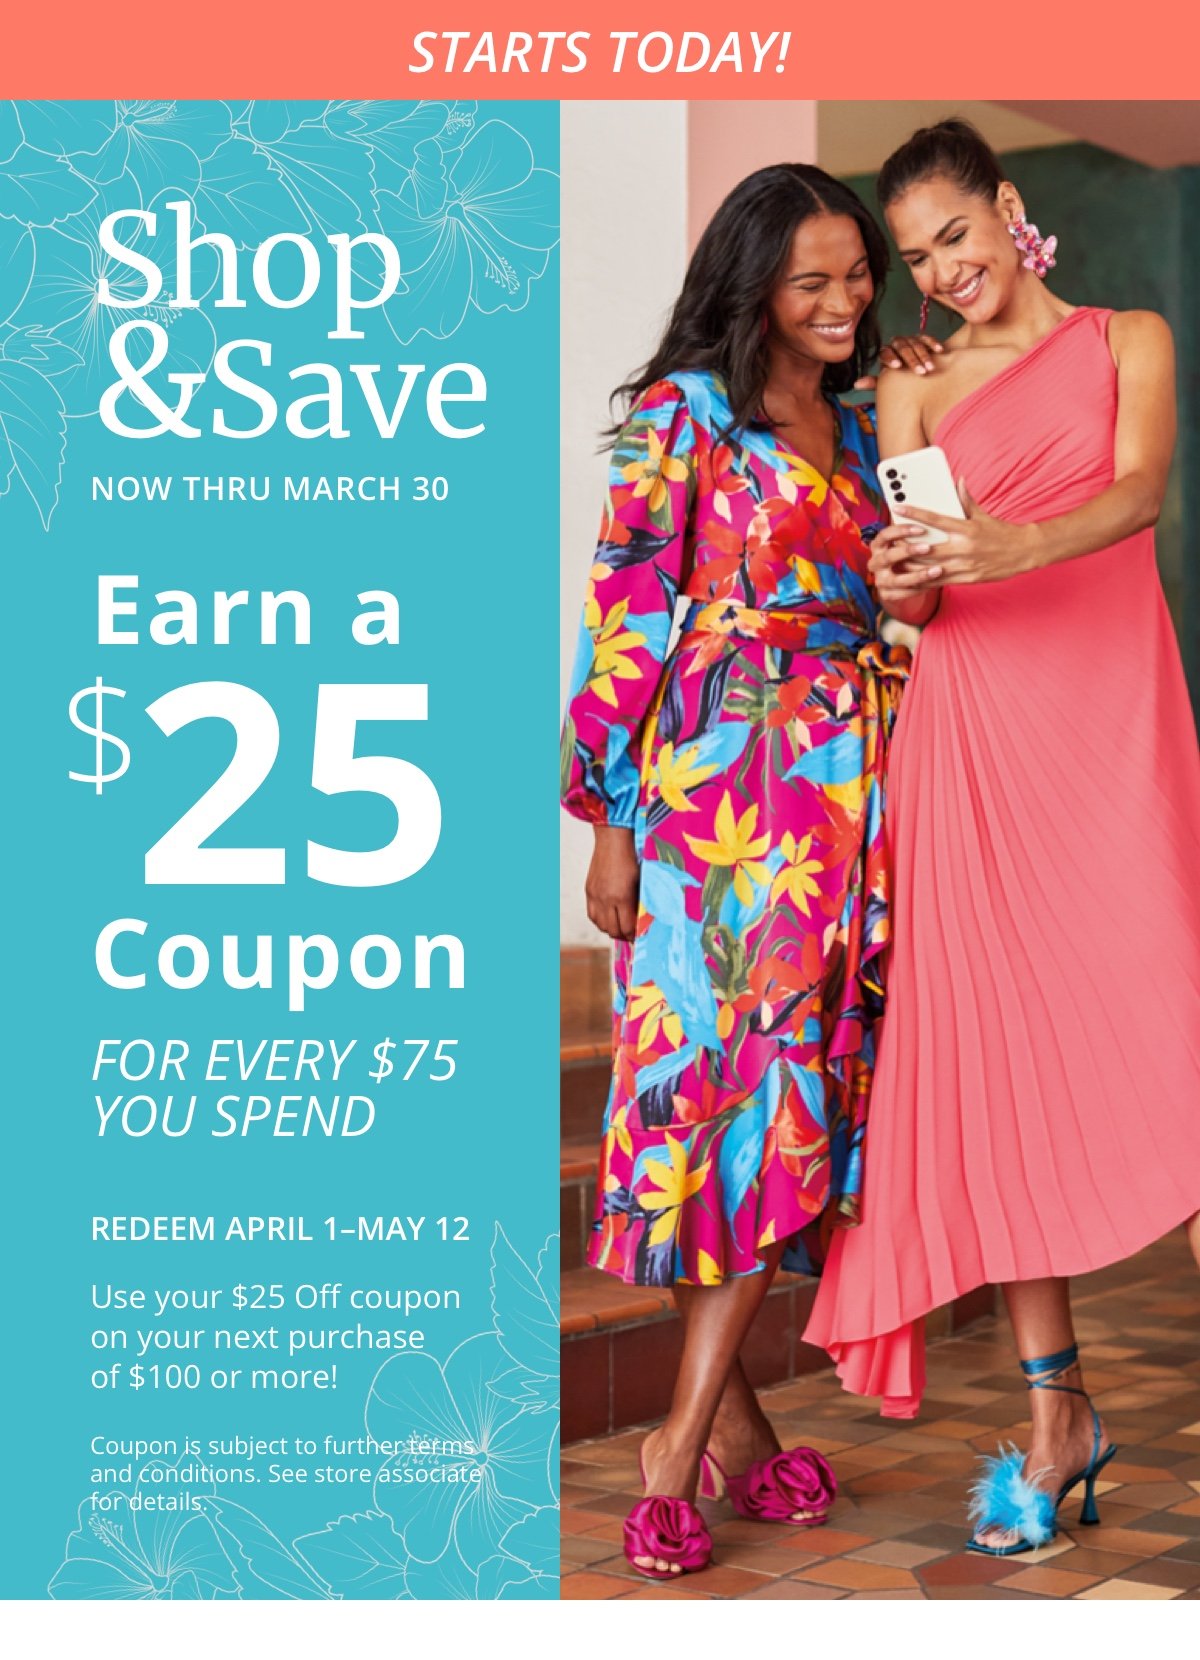 Starts Today! Shop and Save Now Thru March 30 Earn a \\$25 Coupon FOR EVERY \\$75 YOU SPEND Redeem April 1 to May 12 Use your \\$25 Off coupon on your next purchase of \\$100 or more! Coupon is subject for further terms and conditions. See store associate for details.